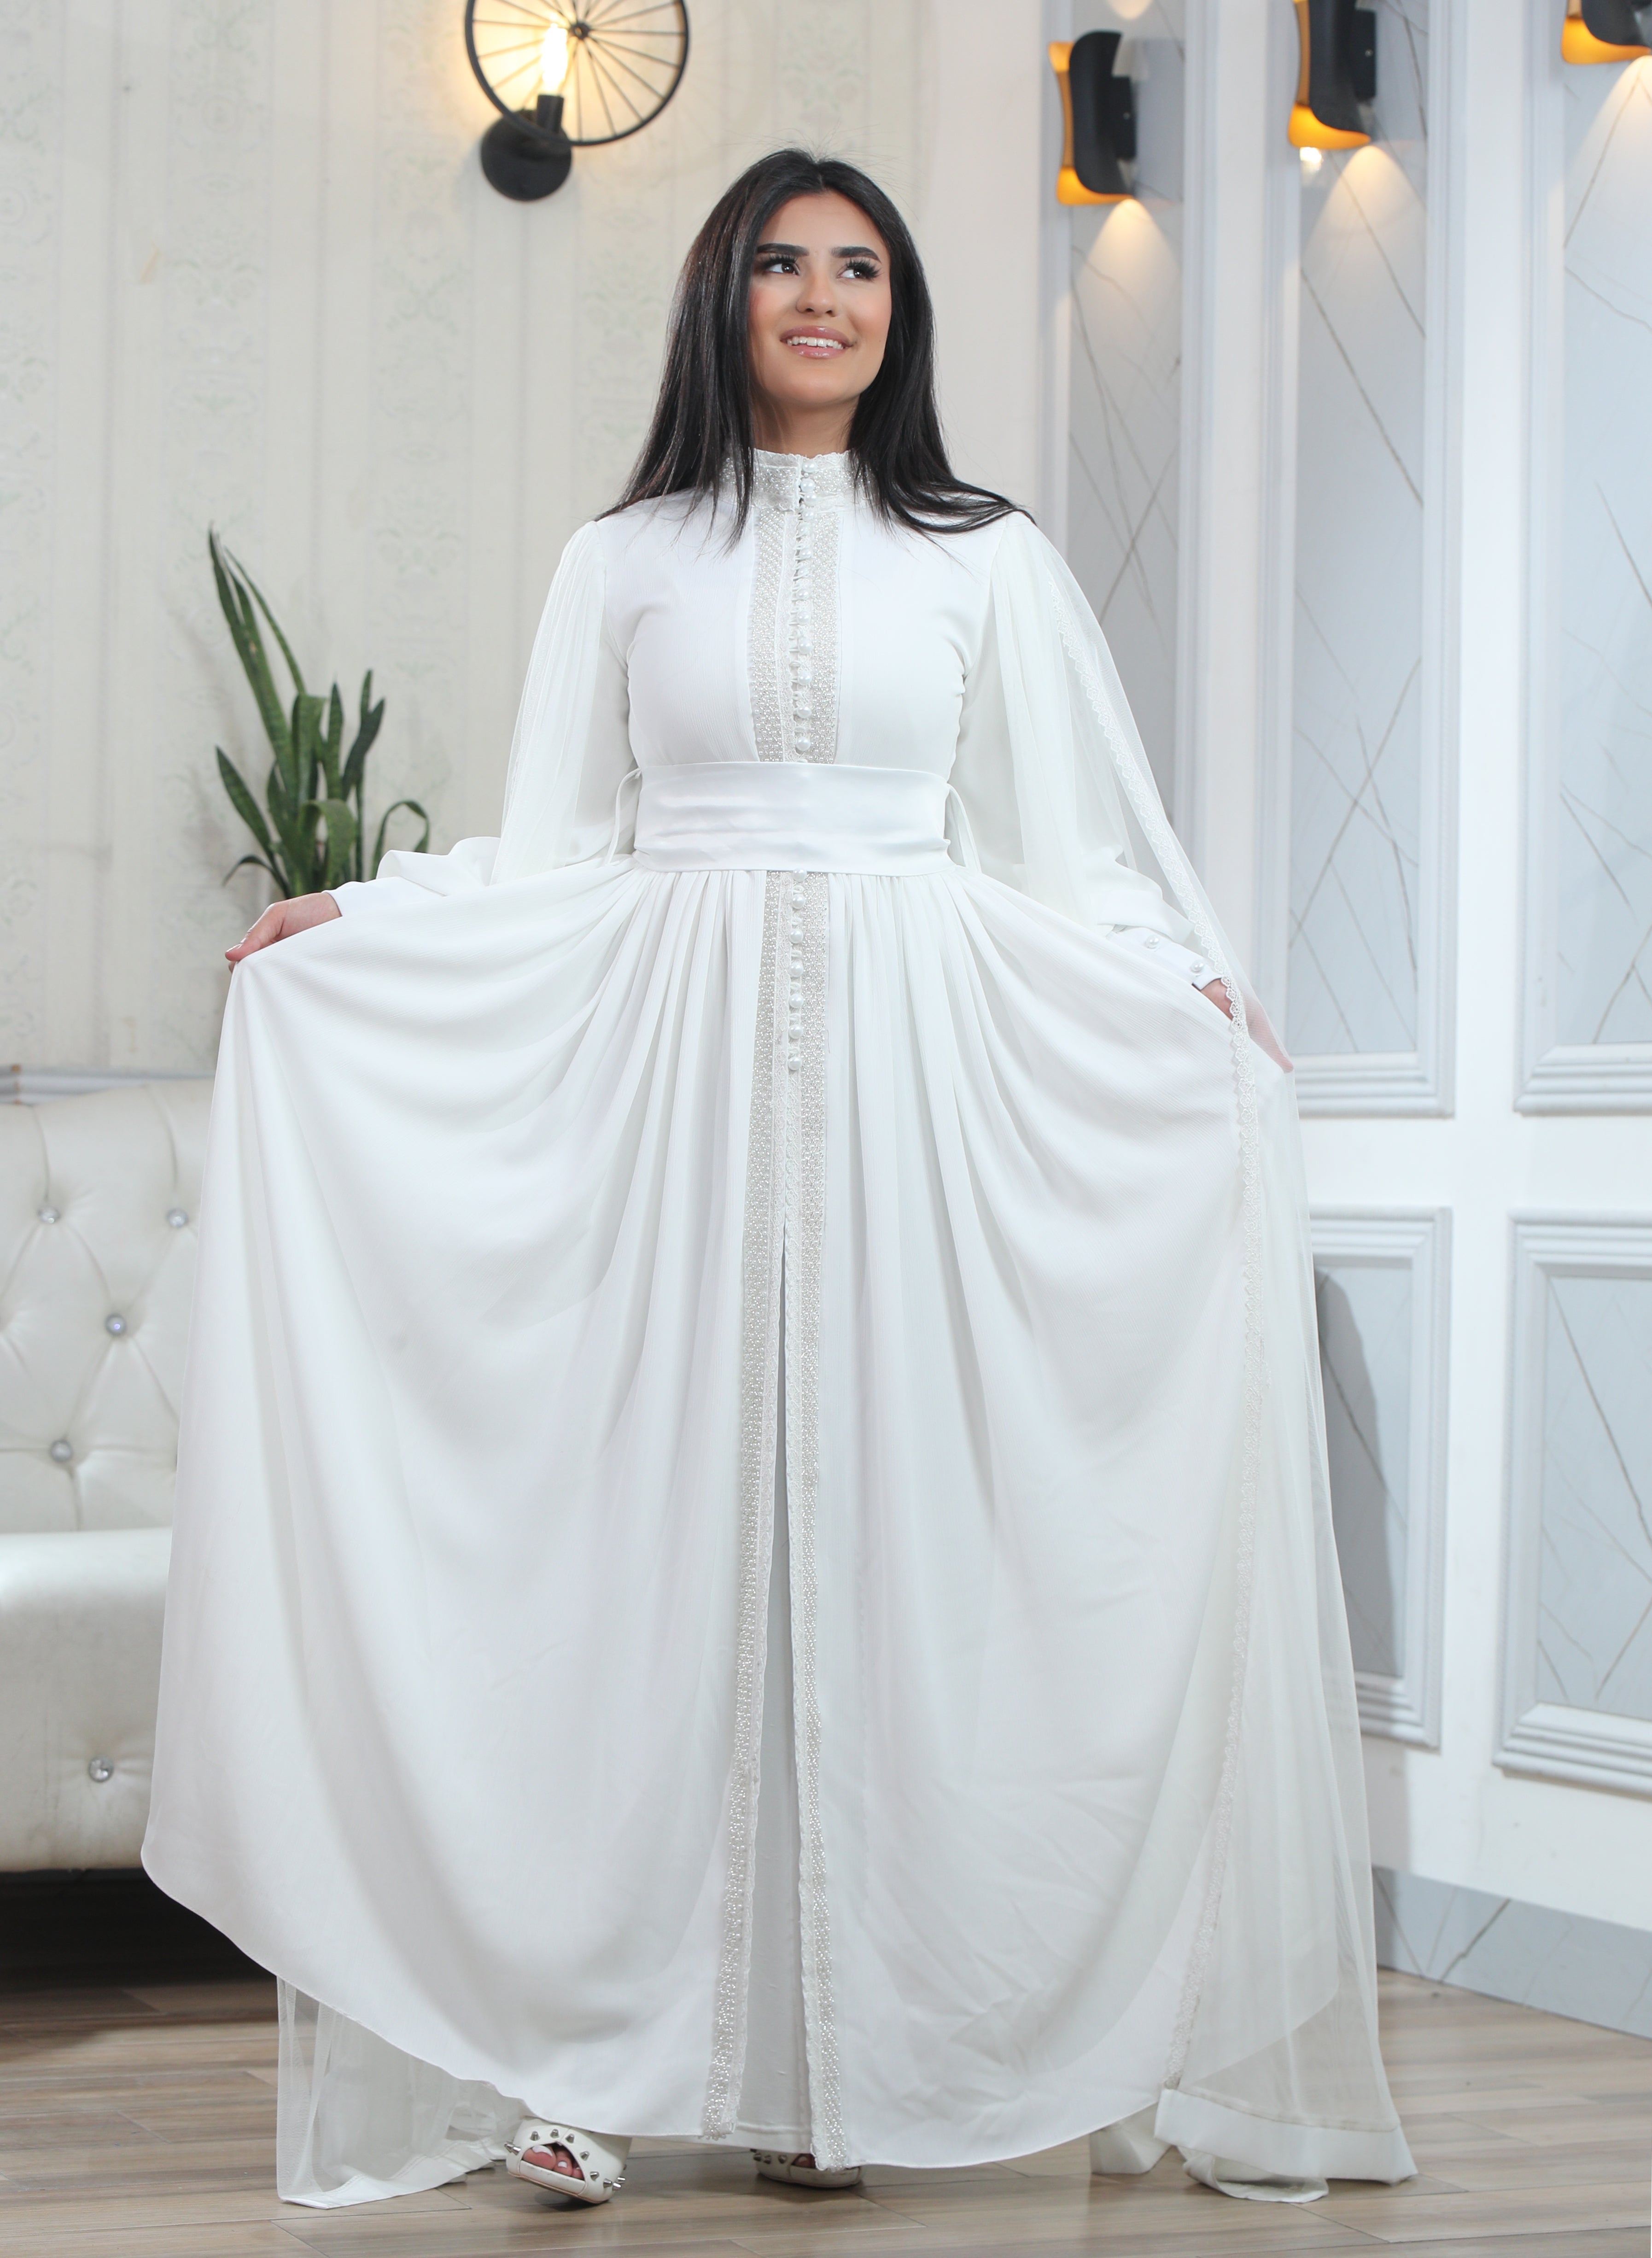 Cloak Sleeves Formal Dress with beads & Pearls